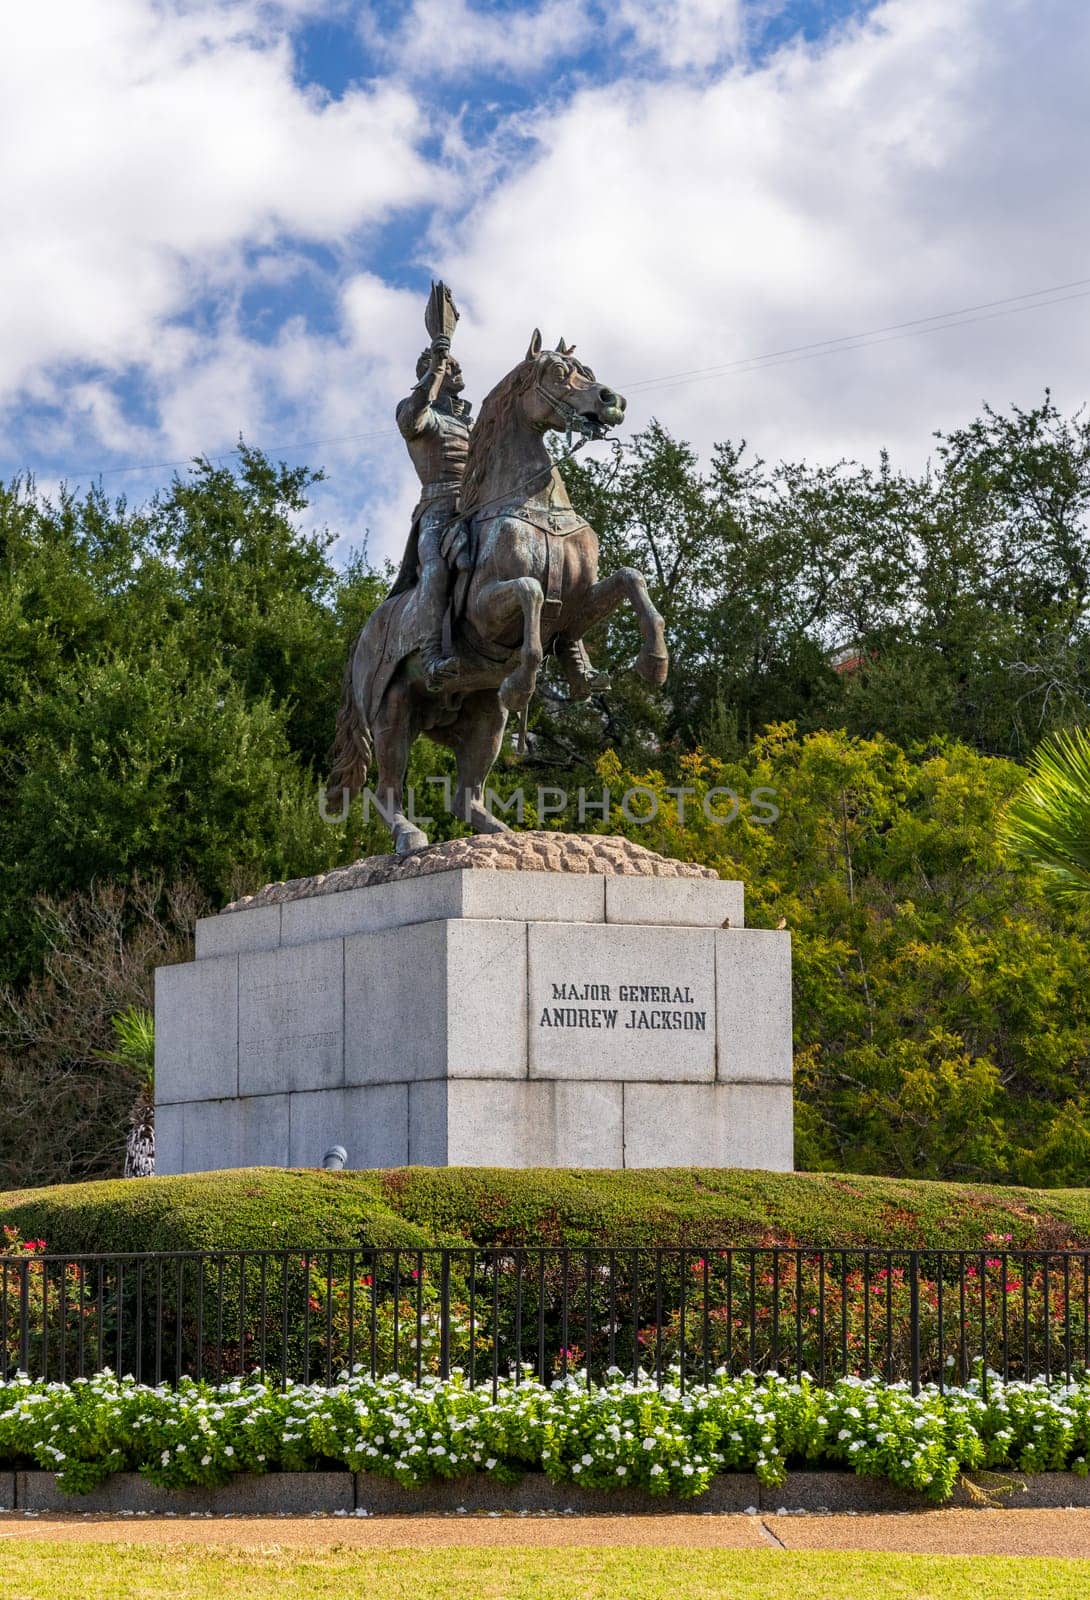 Statue of Major General Andrew Jackson in New Orleans park by steheap